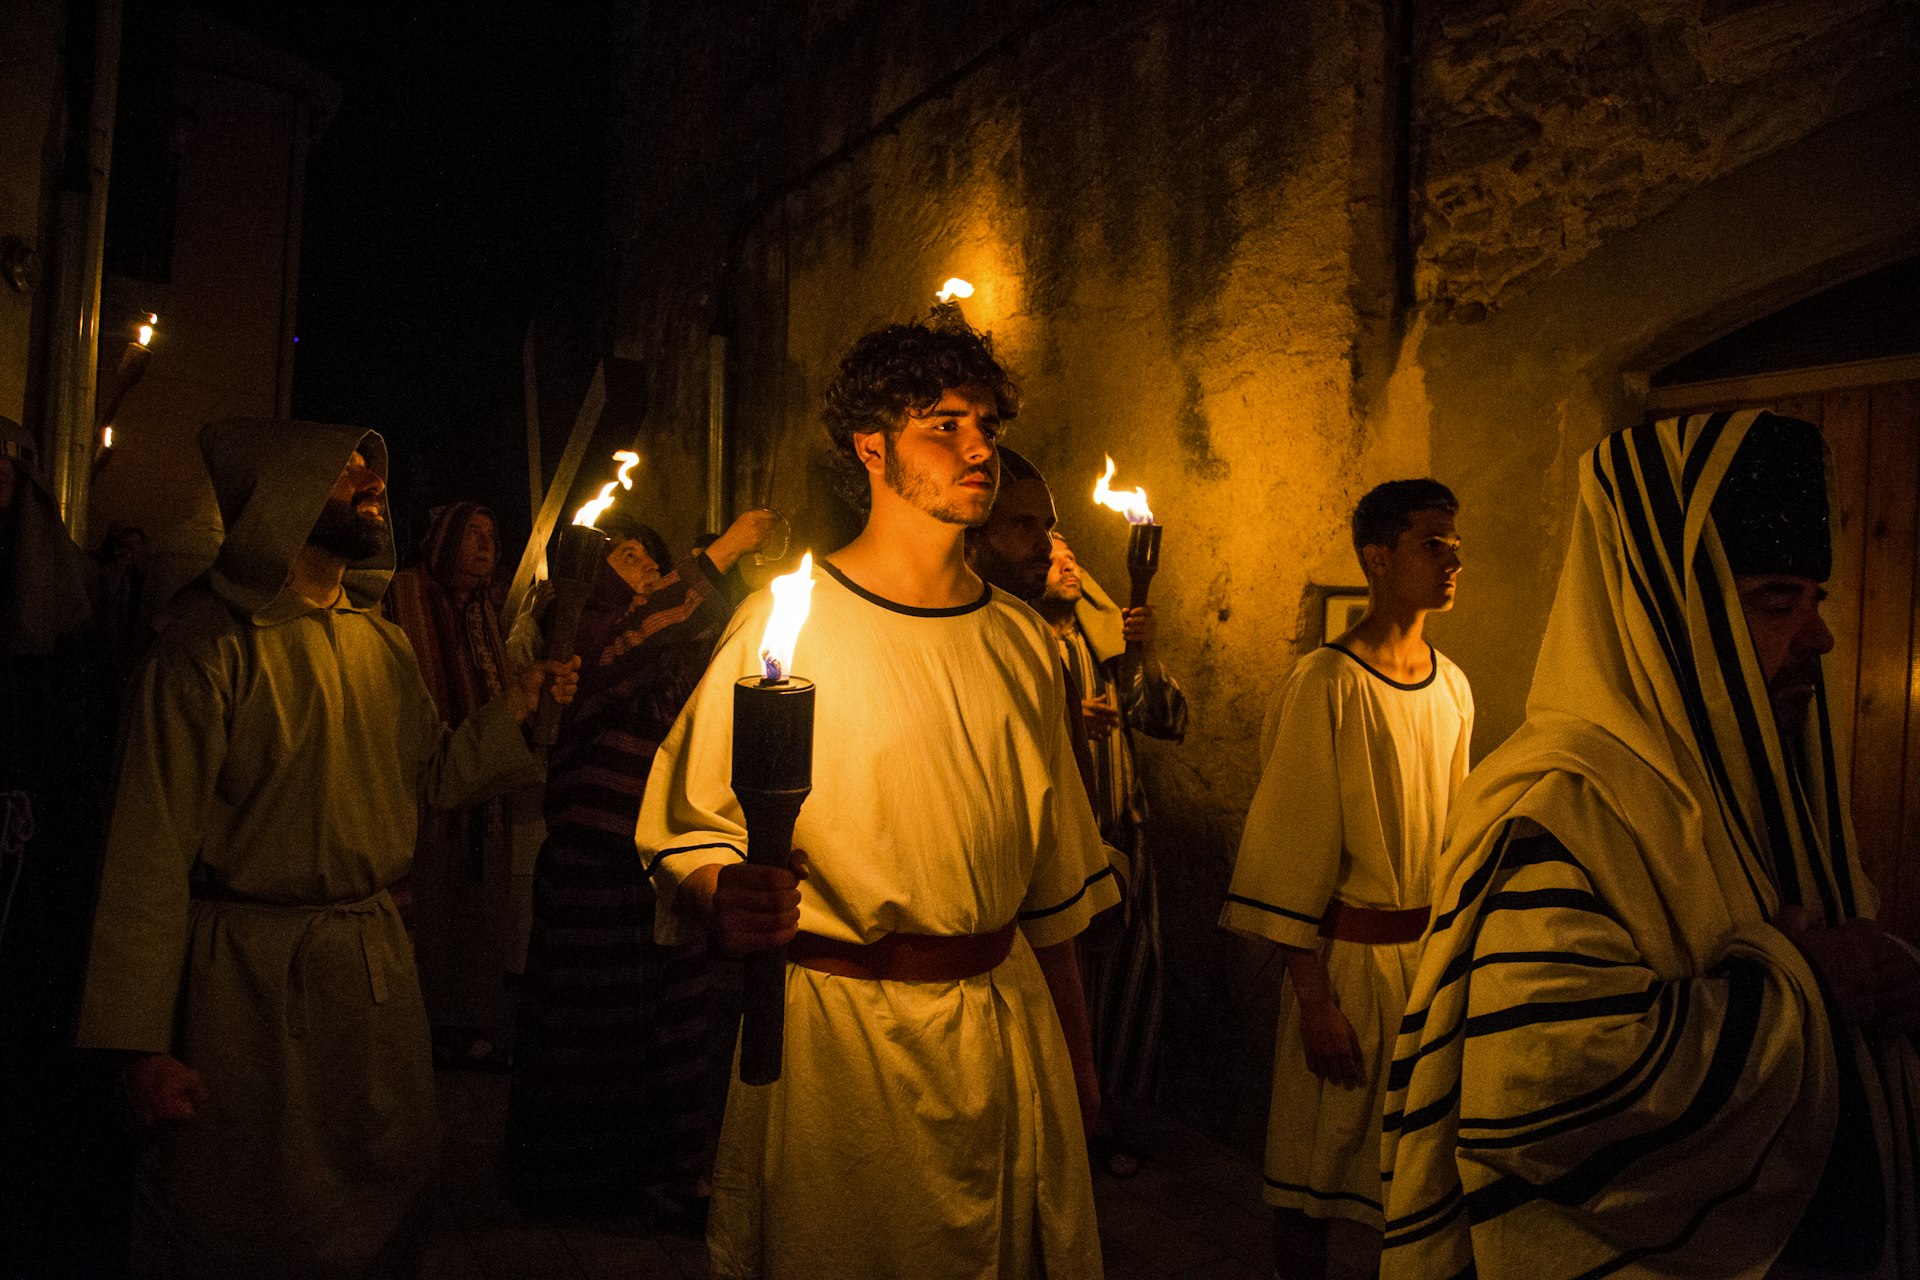 Roman soldiers, known as the 'Manages' march through Verges during Semana Santa